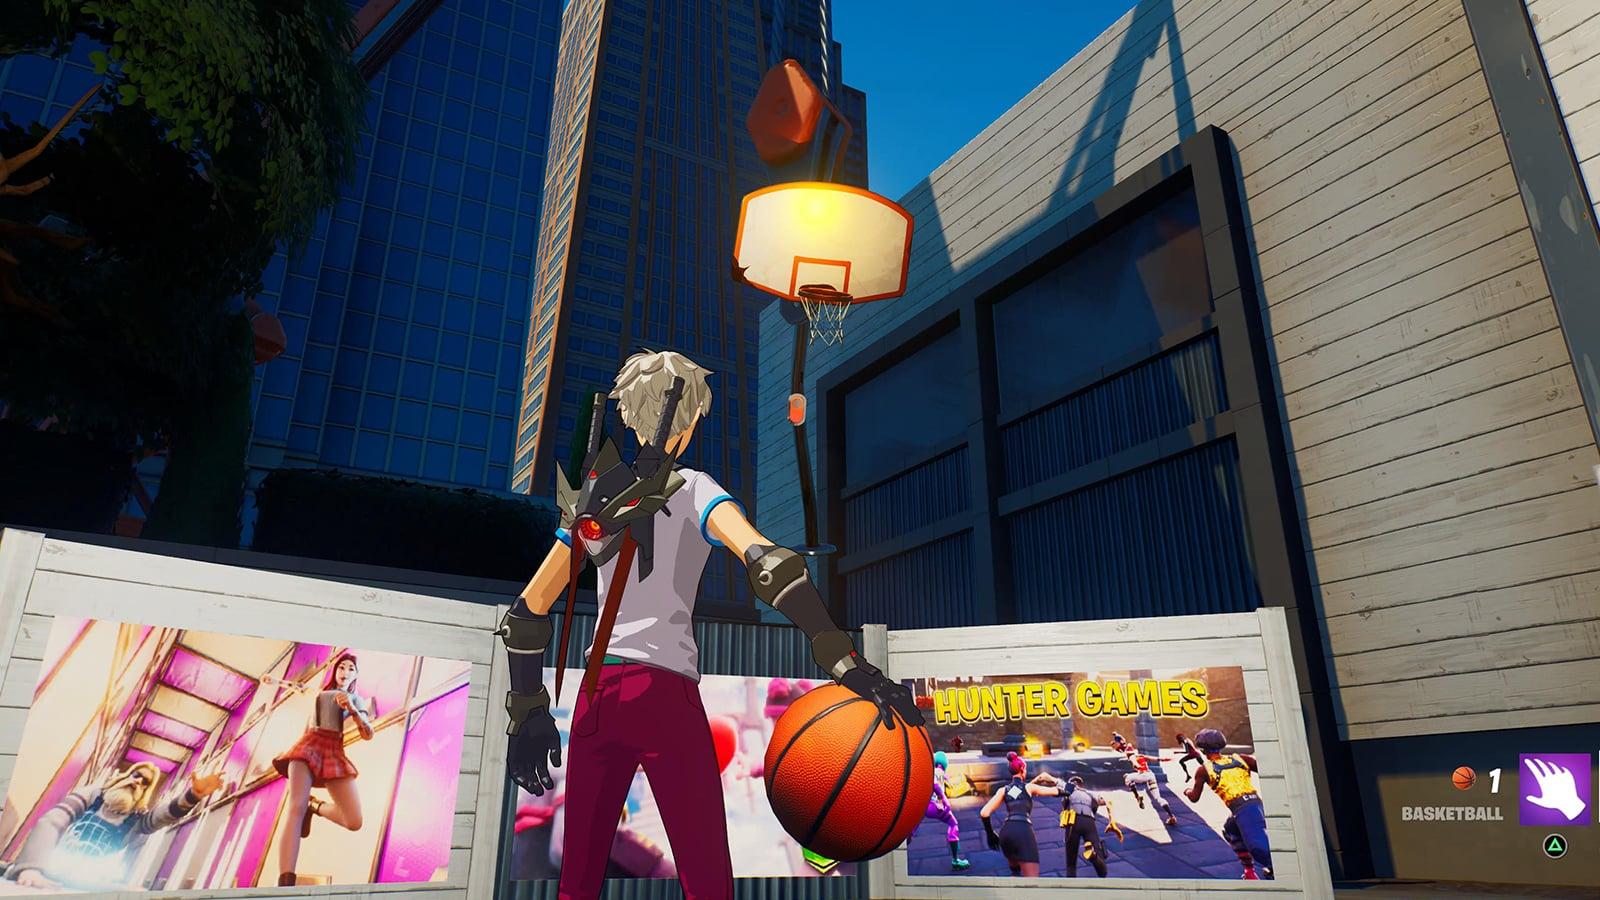 The NBA Joins Fortnite To Celebrate the NBA's 75th Anniversary